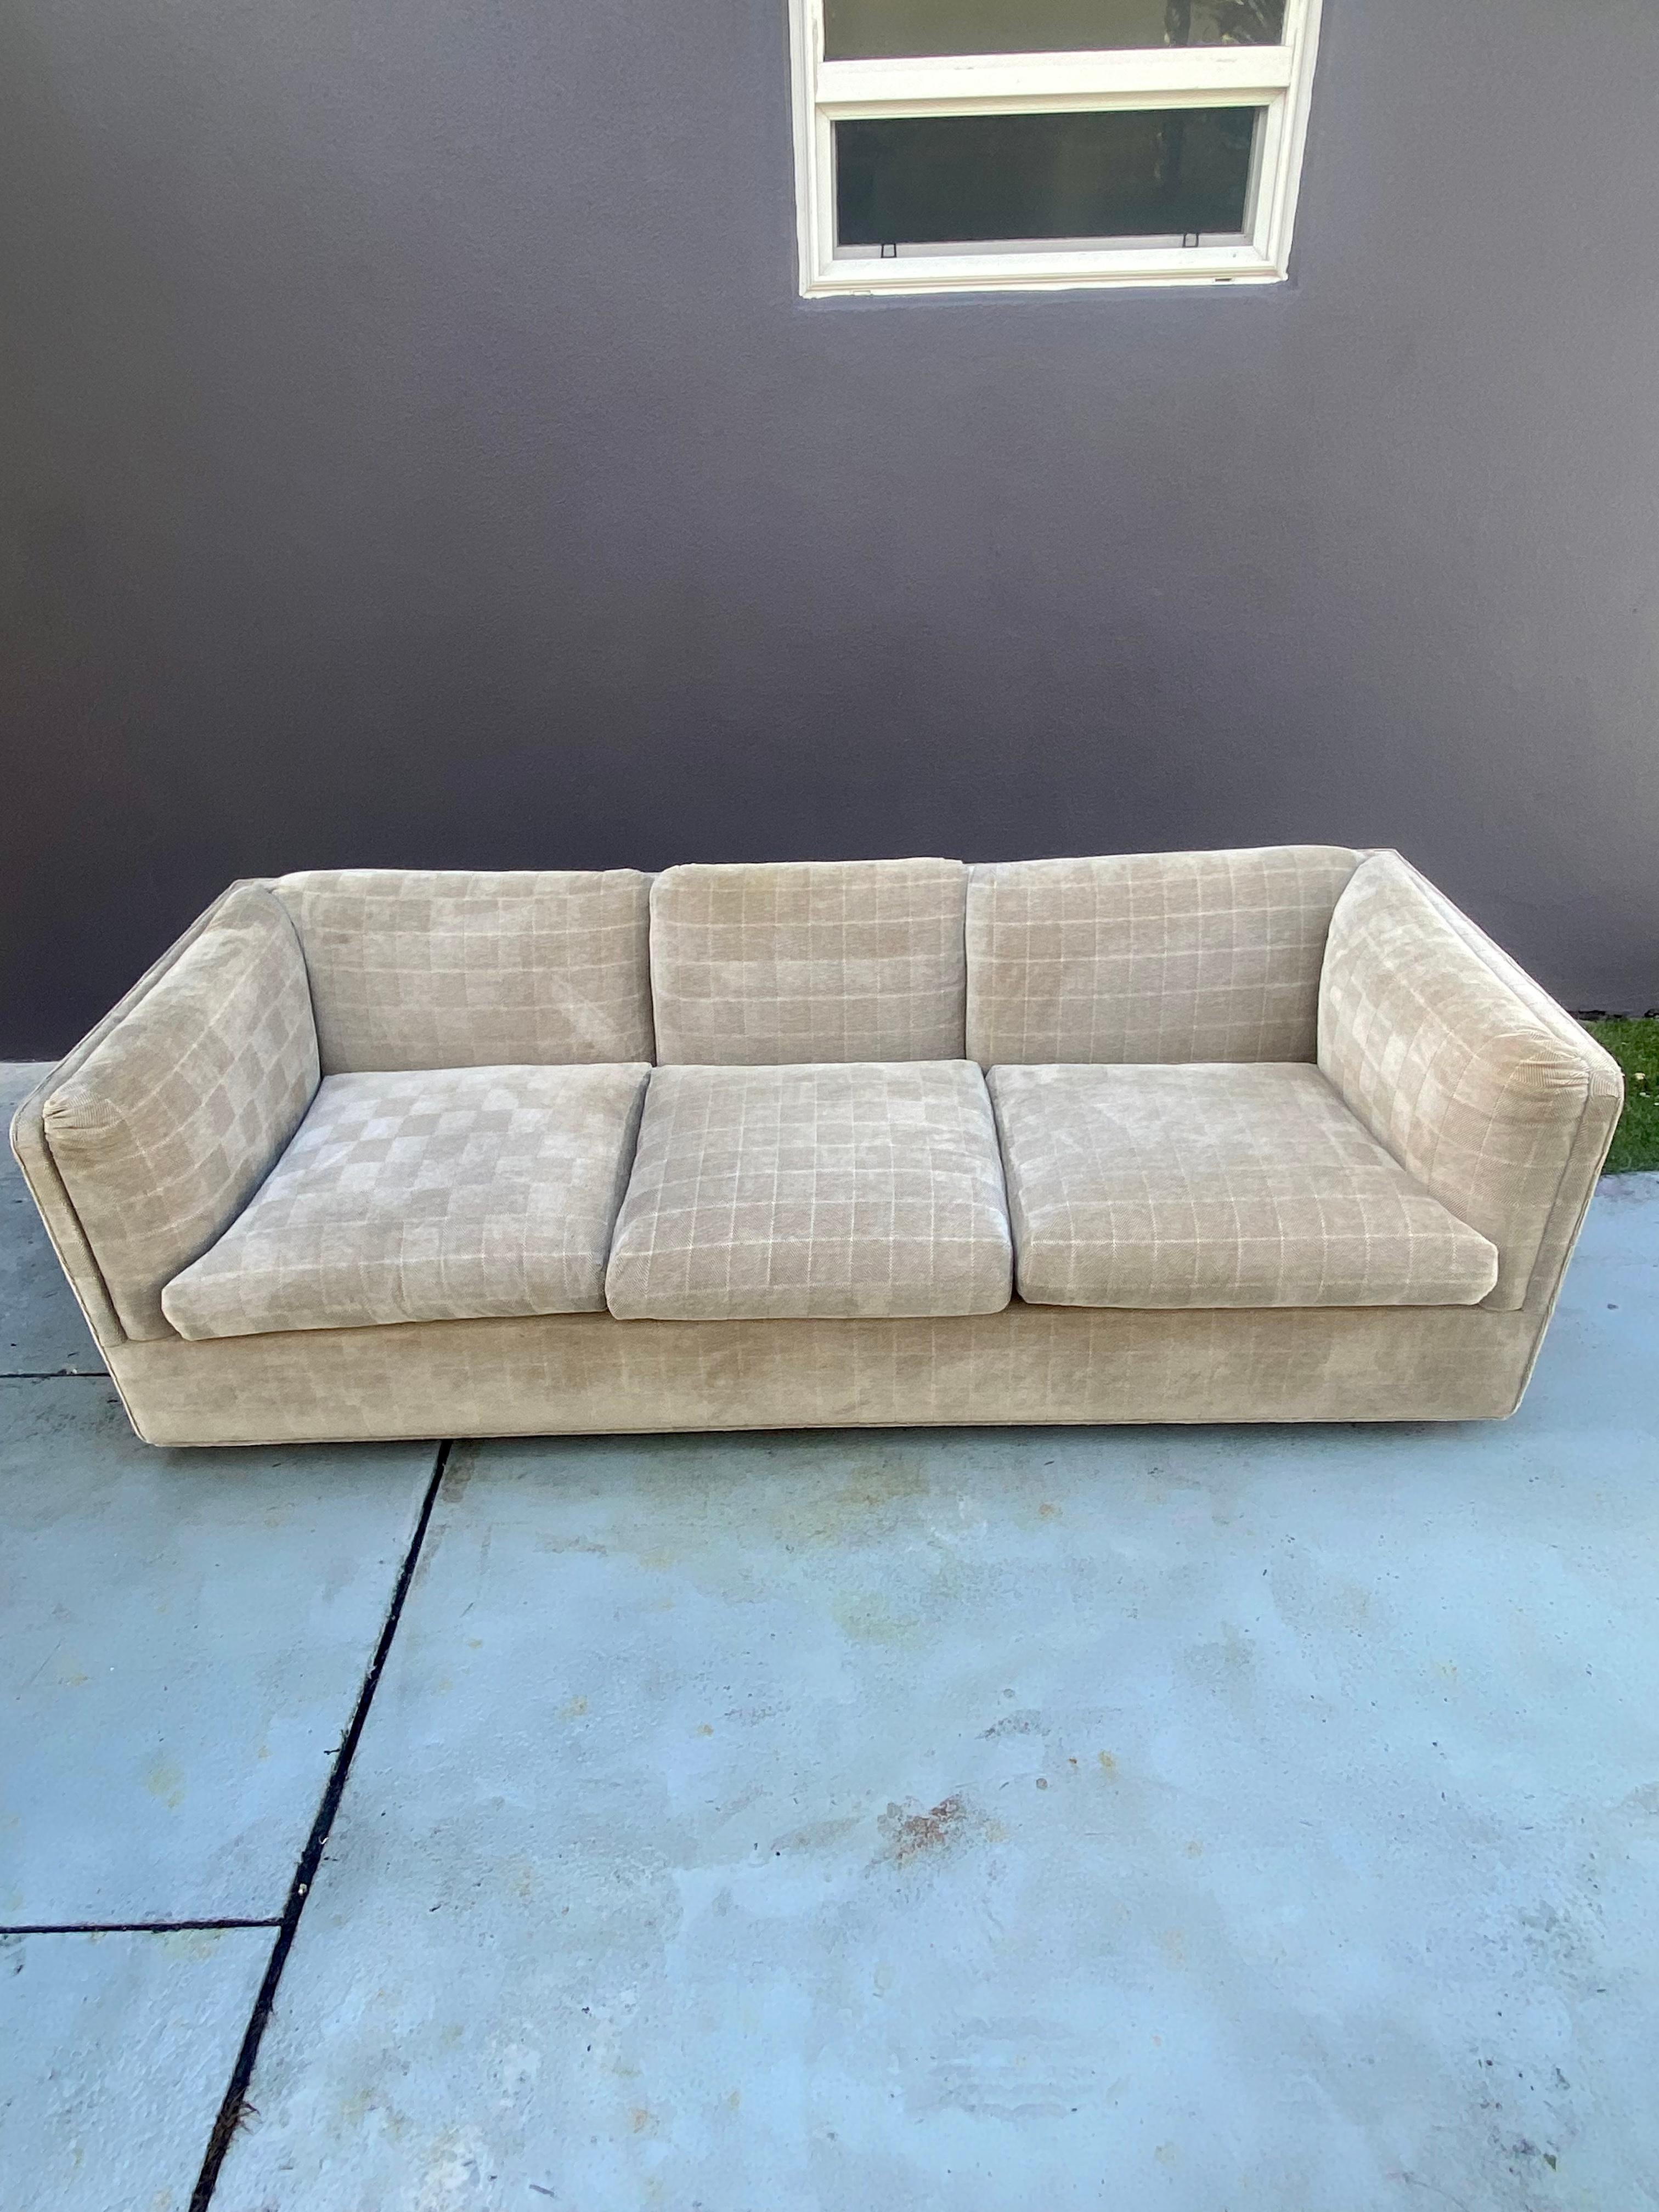 On offer on this occasion is one of the most stunning sofa you could hope to find. This is an ultra-rare opportunity to acquire what is, unequivocally, the best of the best, it being a most spectacular and beautifully presented sofa. Outstanding